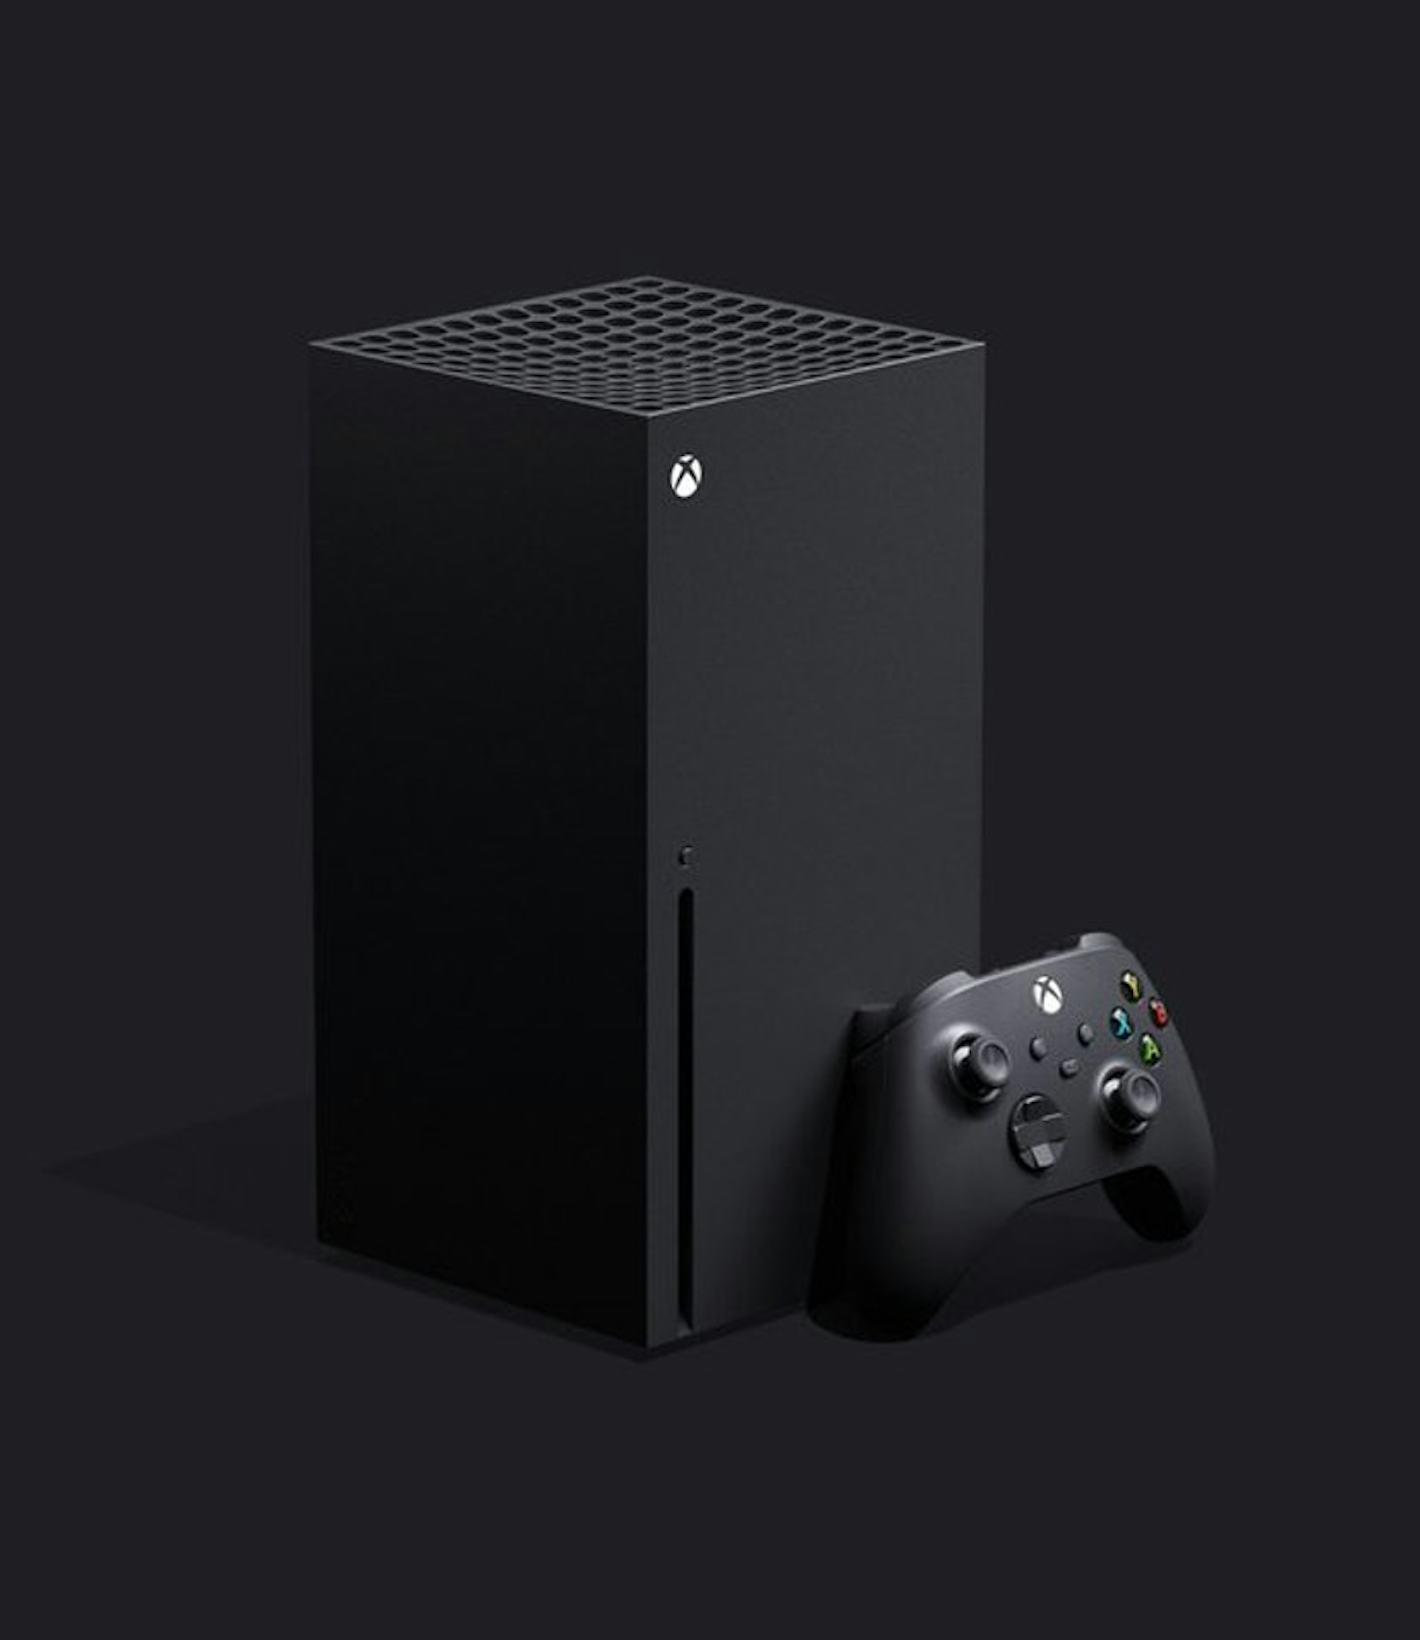 Microsoft has discontinued the Xbox One X and Xbox One S digital edition